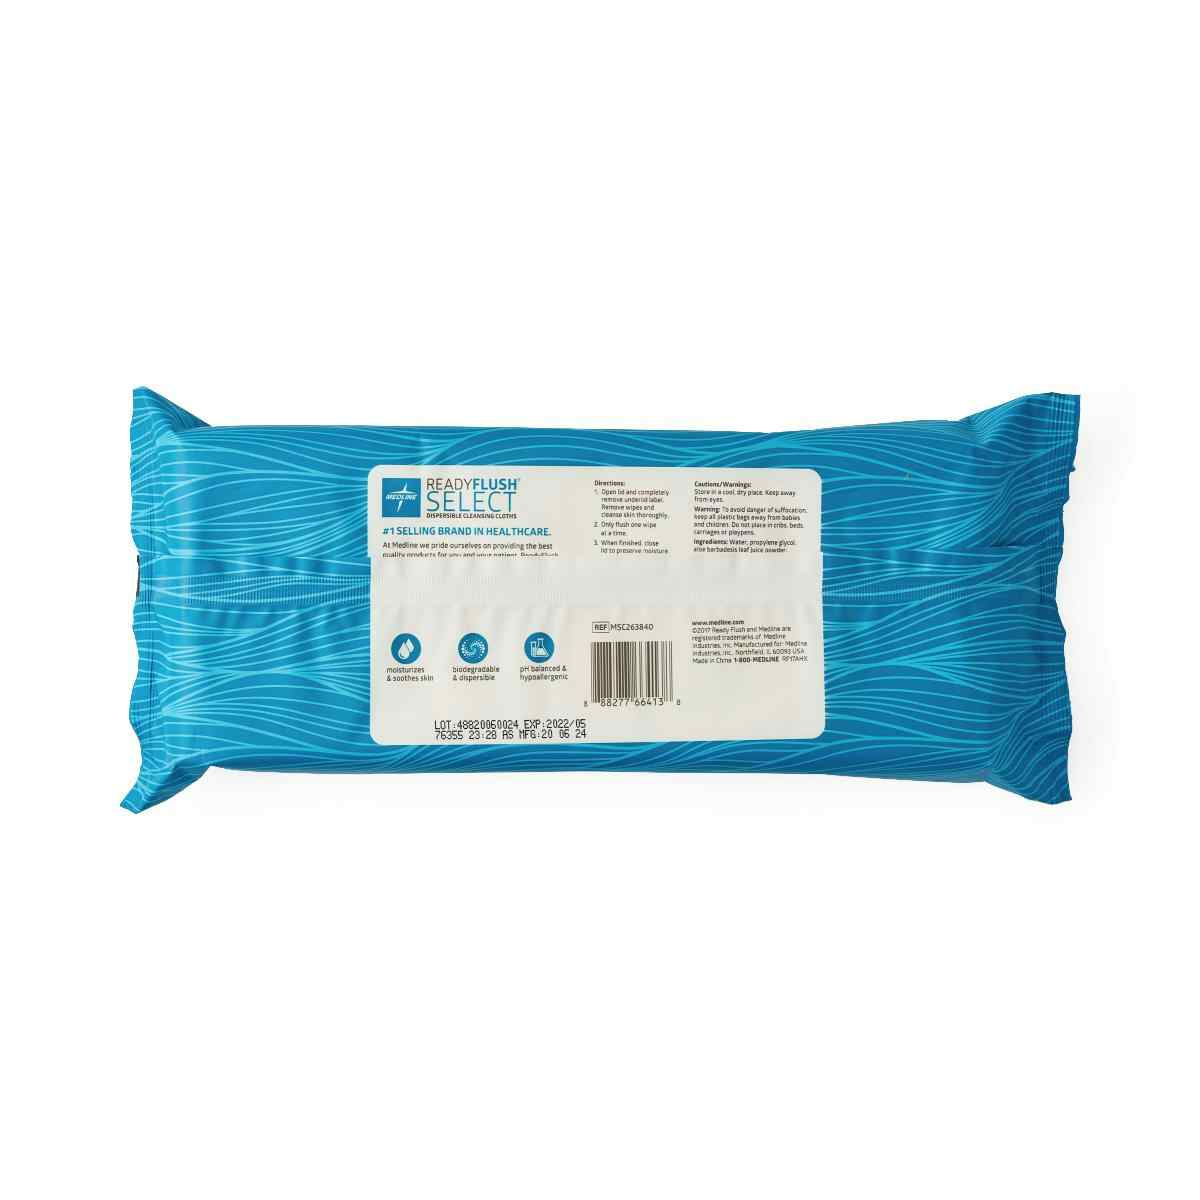 ReadyFlush SELECT Flushable Personal Cleansing Wipes